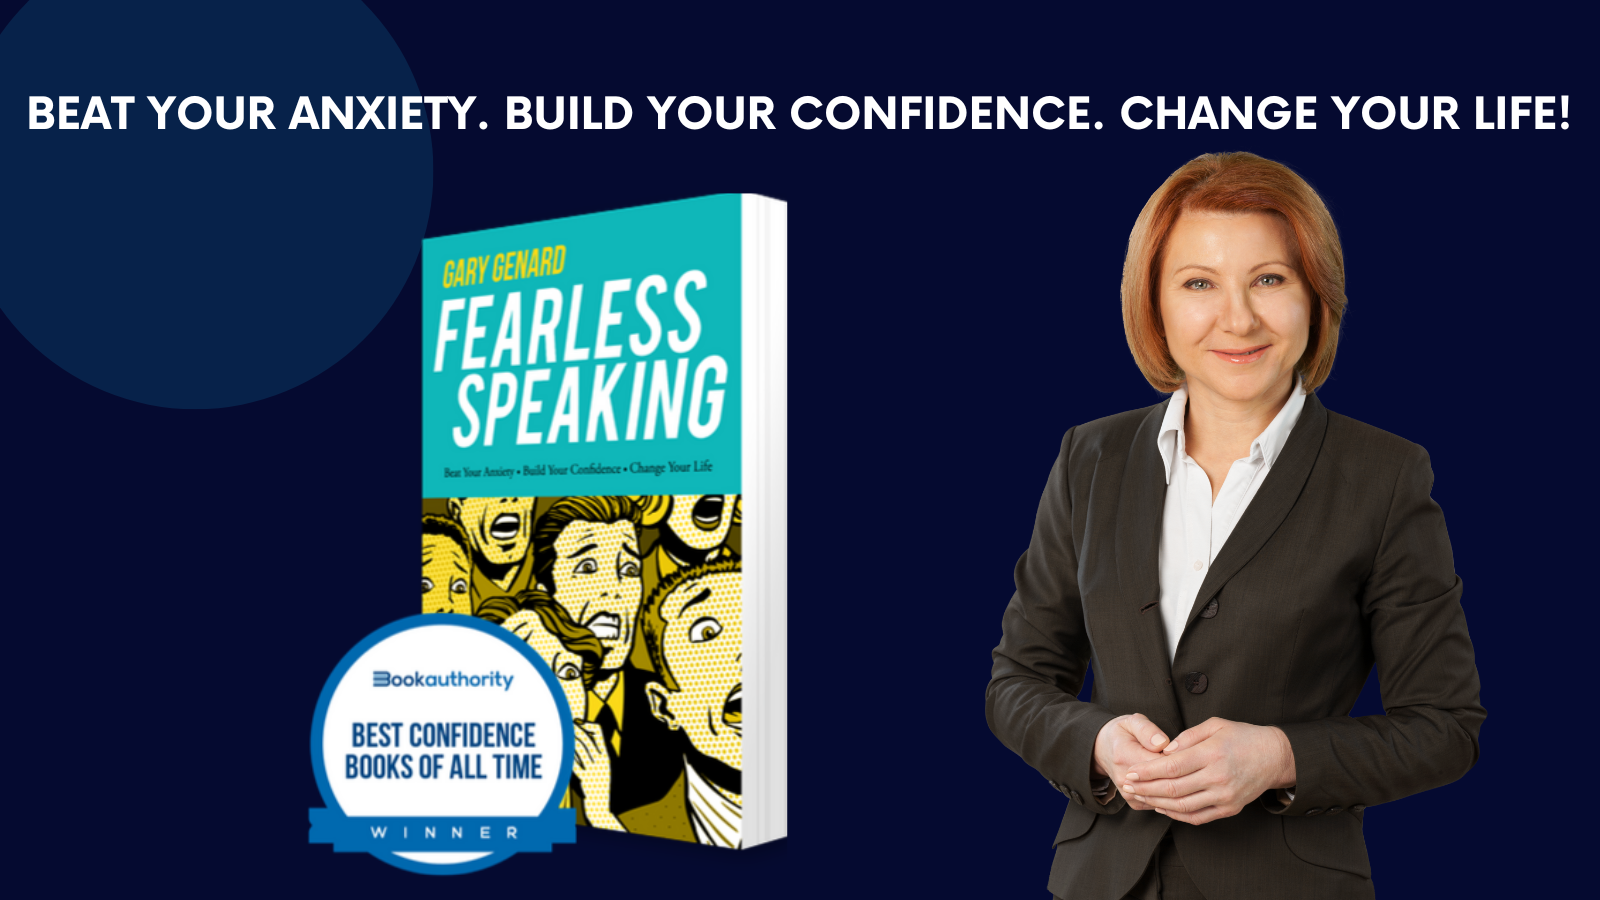 Dr. Gary Genard's book on overcoming stage fright, Fearless Speaking.